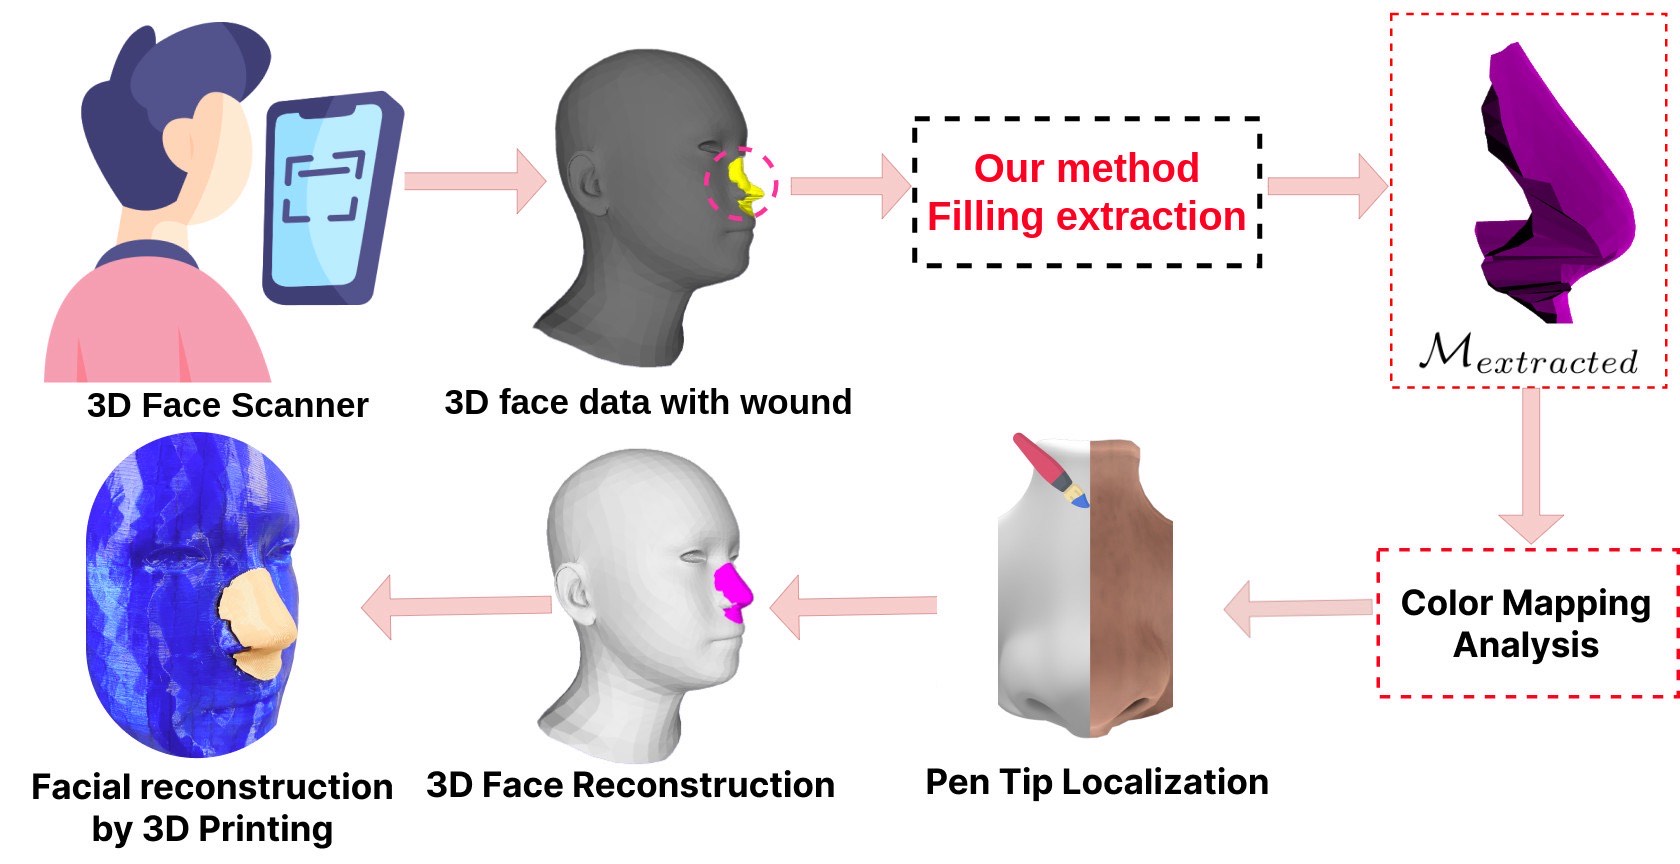 Advancing Wound Filling Extraction on 3D Faces: An Auto-Segmentation and Wound Face Regeneration Approach